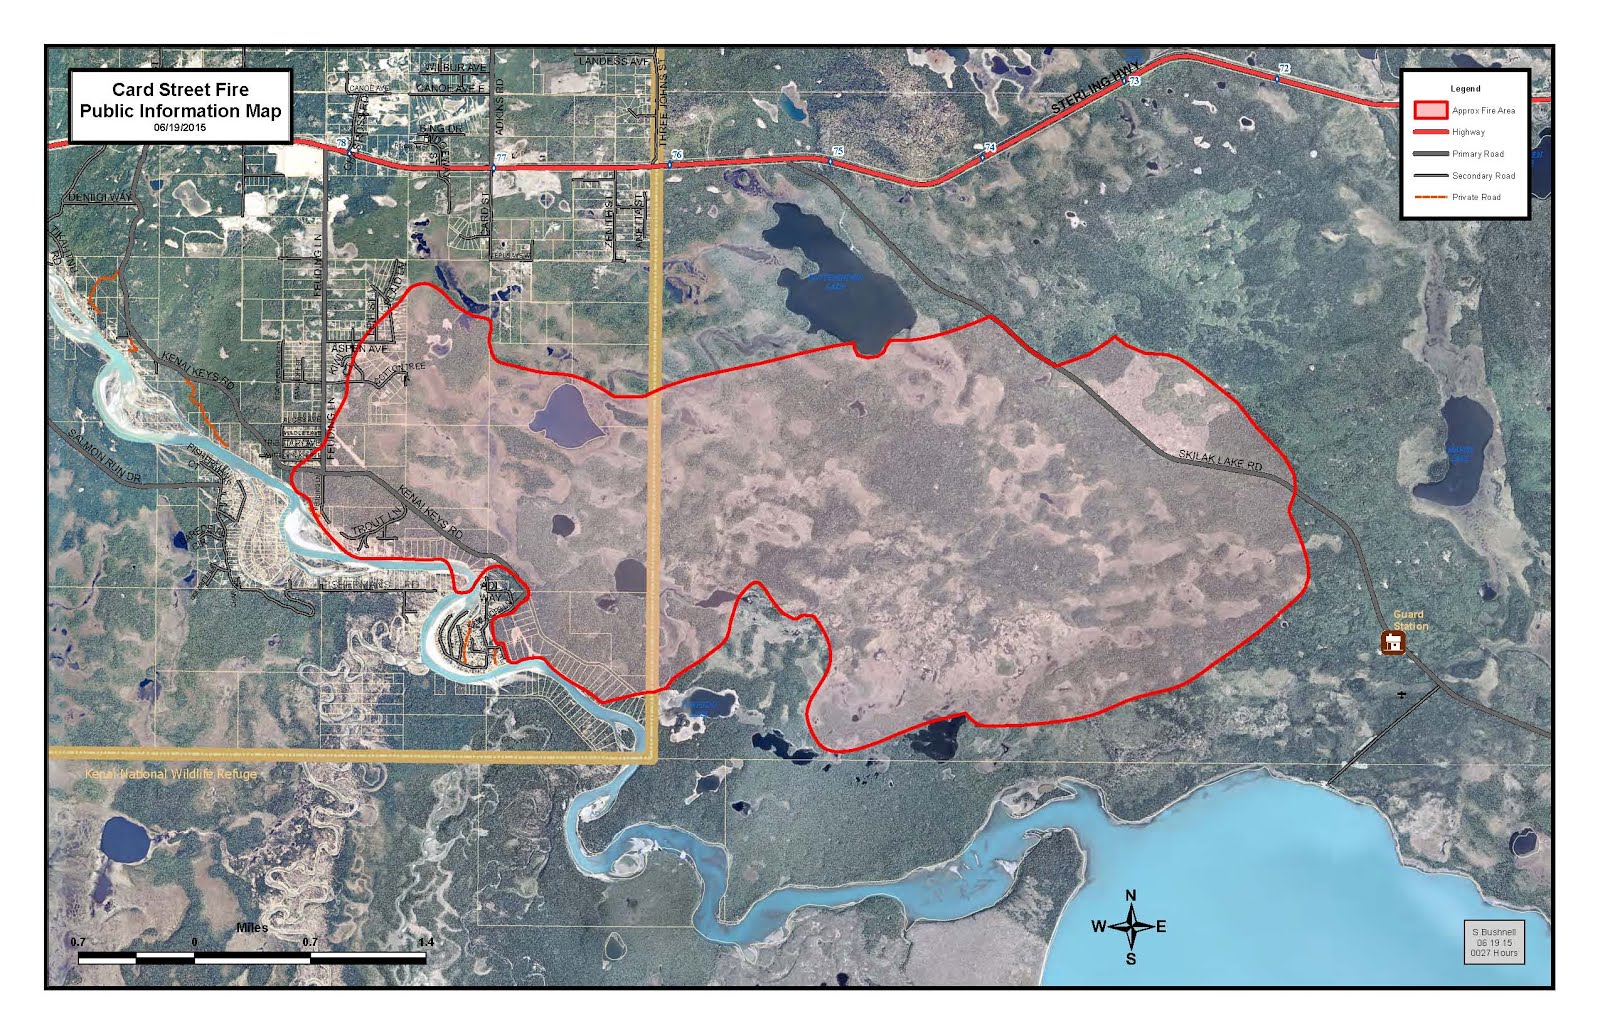 The Kenai Peninsula Borough Office of Emergency Managemnet has released this Alaska Division of Forestry map of the perimeter of the Card Street fire in Sterling as of noon Tuesday.